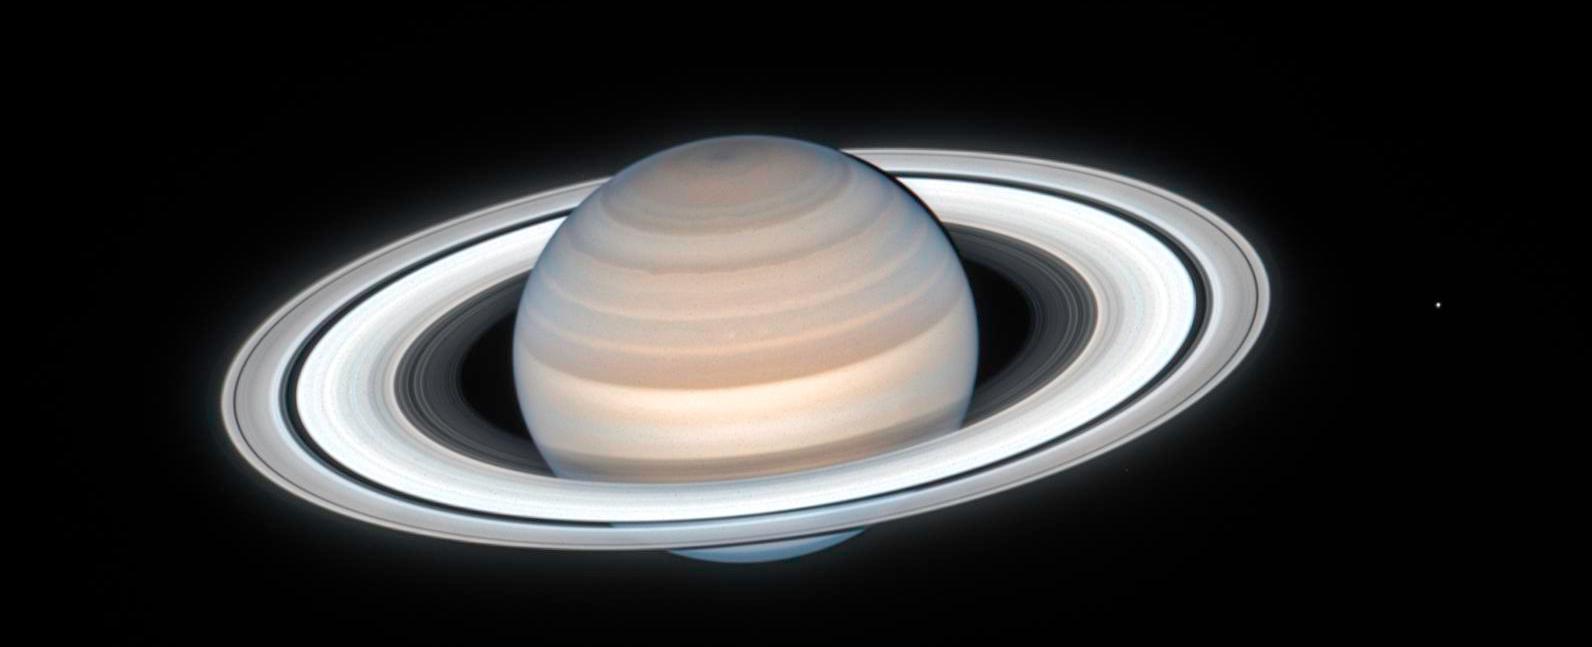 Saturn s southern hemisphere is cloudy while its northern hemisphere is clear as its clouds have sunk deeper into its atmosphere